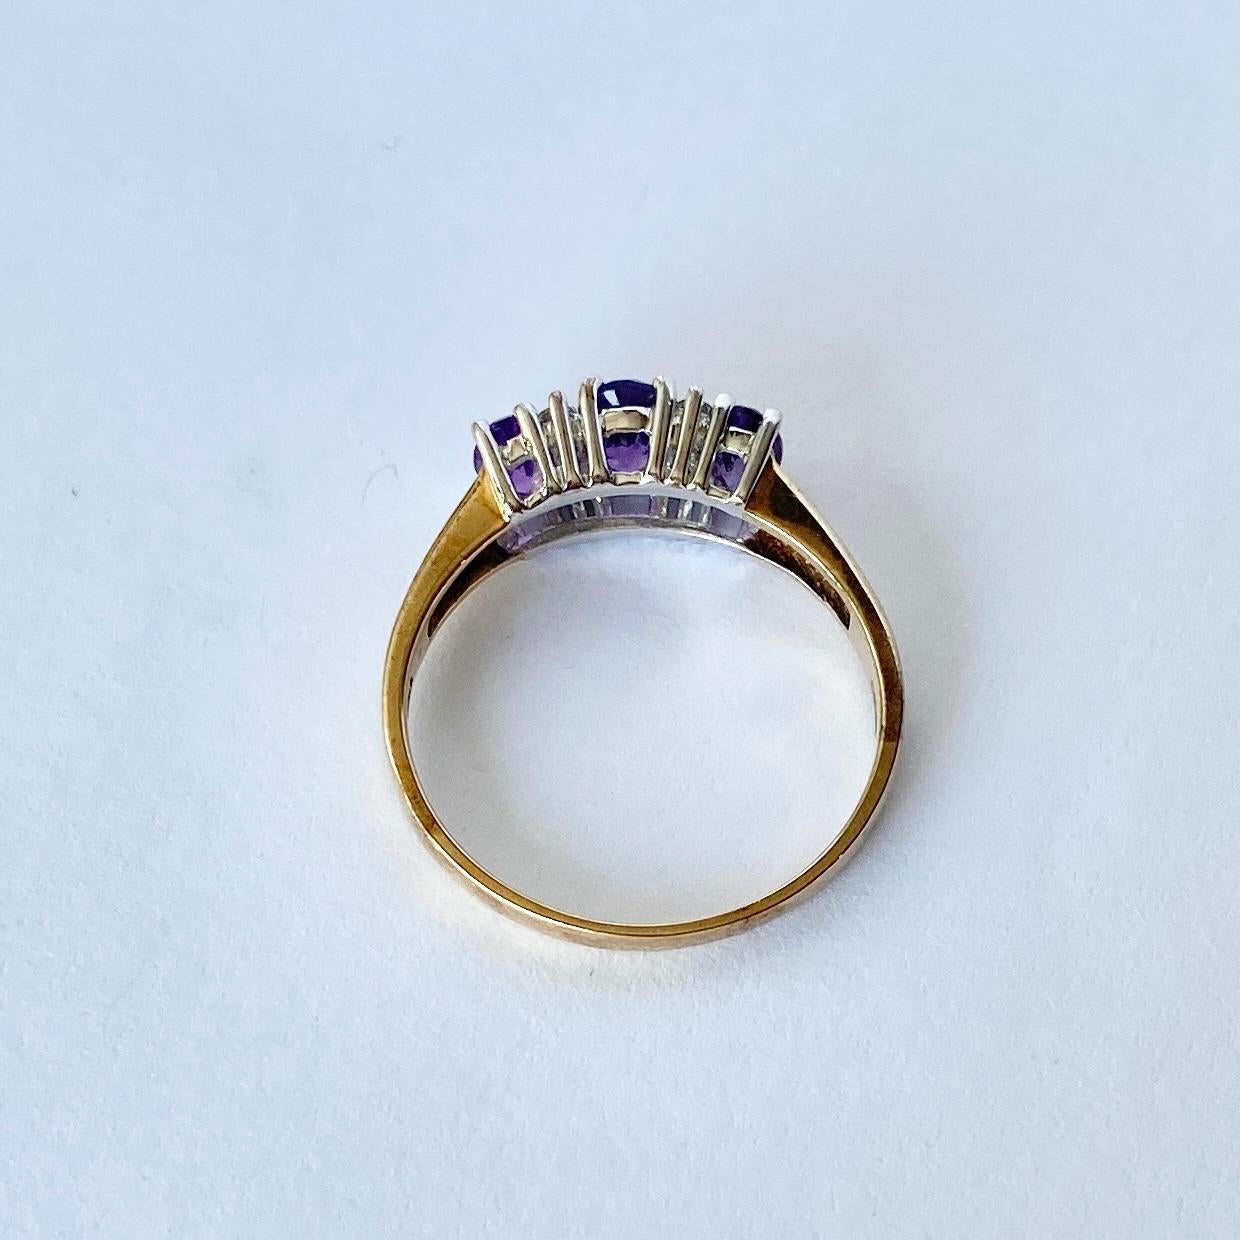 The amethyst stones in this ring are so bright and a gorgeous colour. There are two pairs of diamonds that sit either side of the central stone. Diamond total 15pt and amethyst total 70pts. Modelled in 9carat gold. 

Ring Size: O 1/2 or 7 1/2
Height